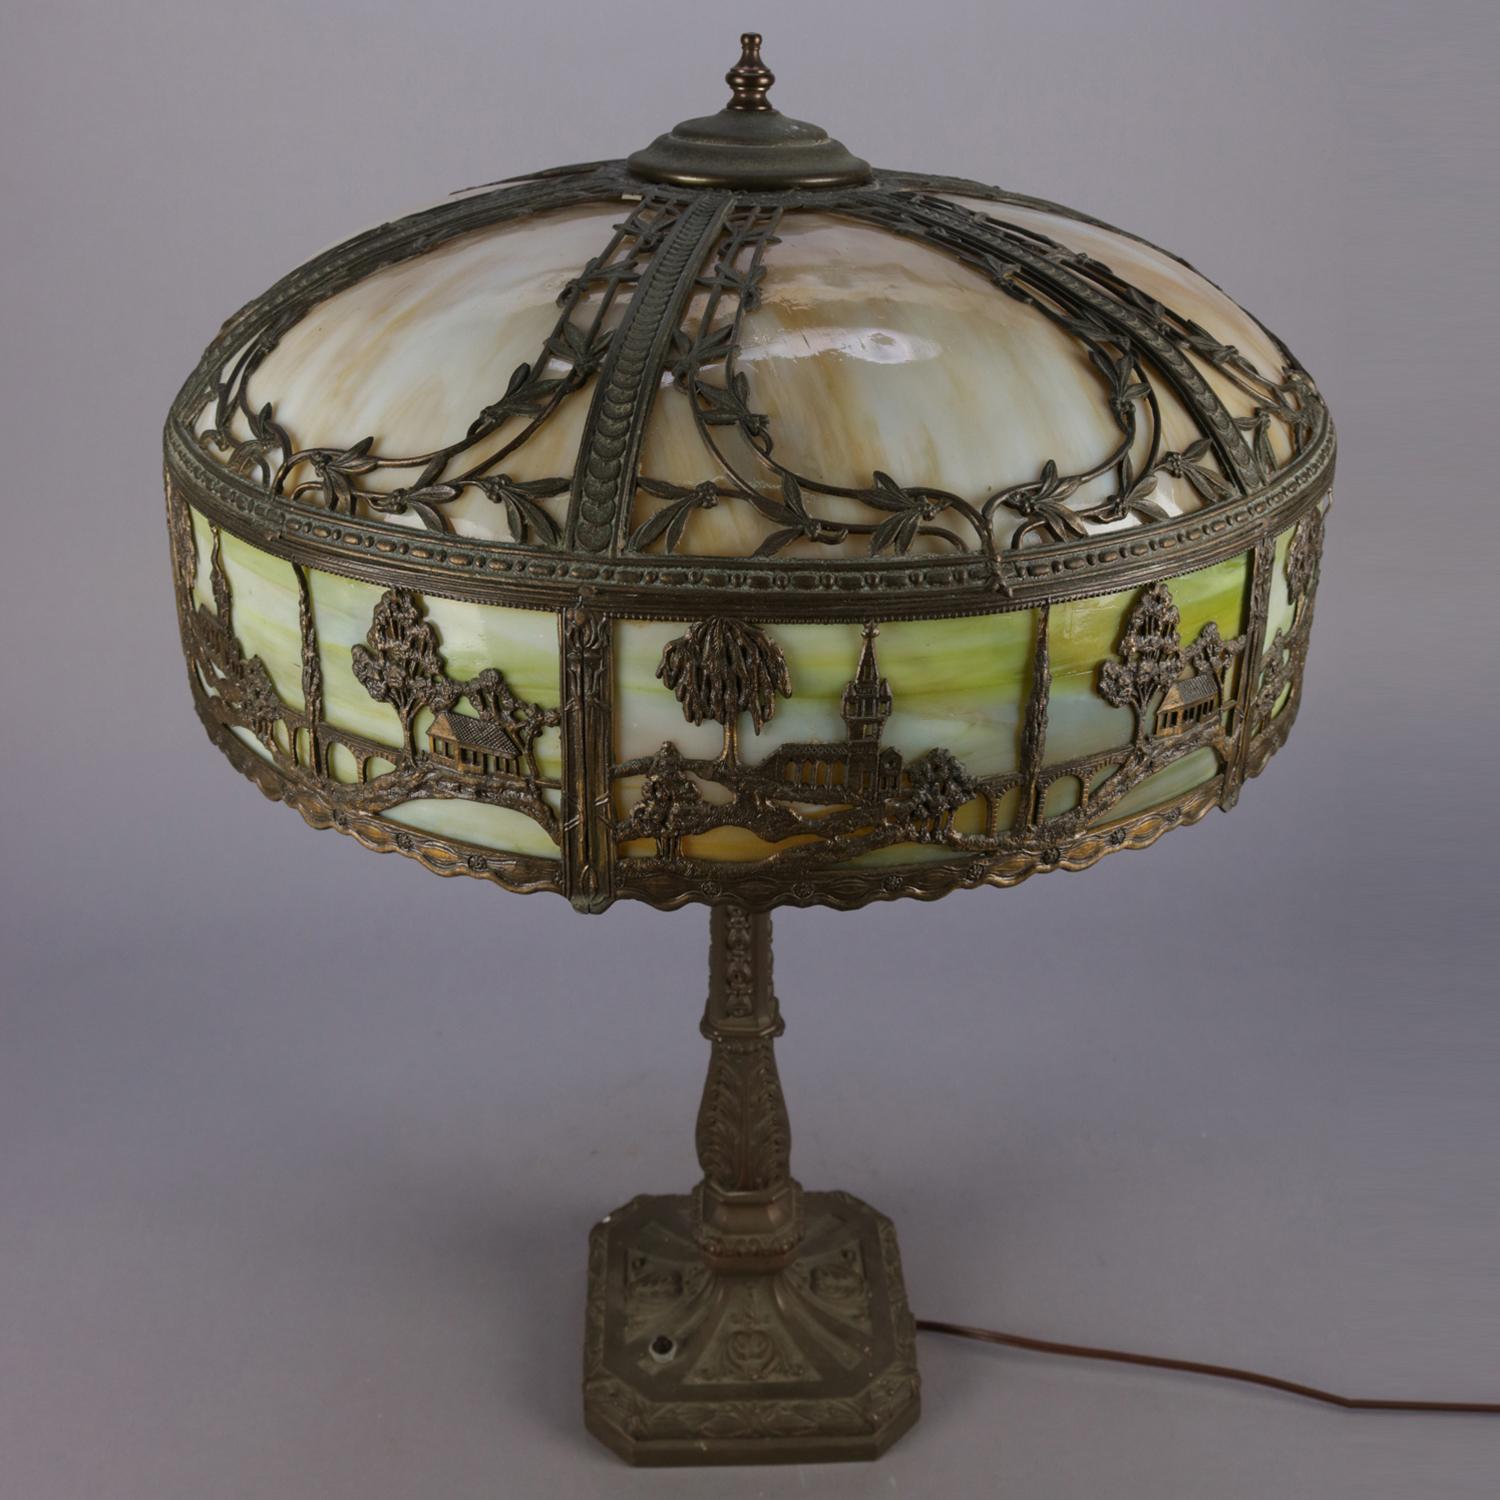 Antique Arts & Crafts Bradley & Hubbard School table lamp features scenic overlay shade with silhouette pictorial pierced frame depicting countryside scene and housing slag glass panels over independently controlled dual light cast foliate base,